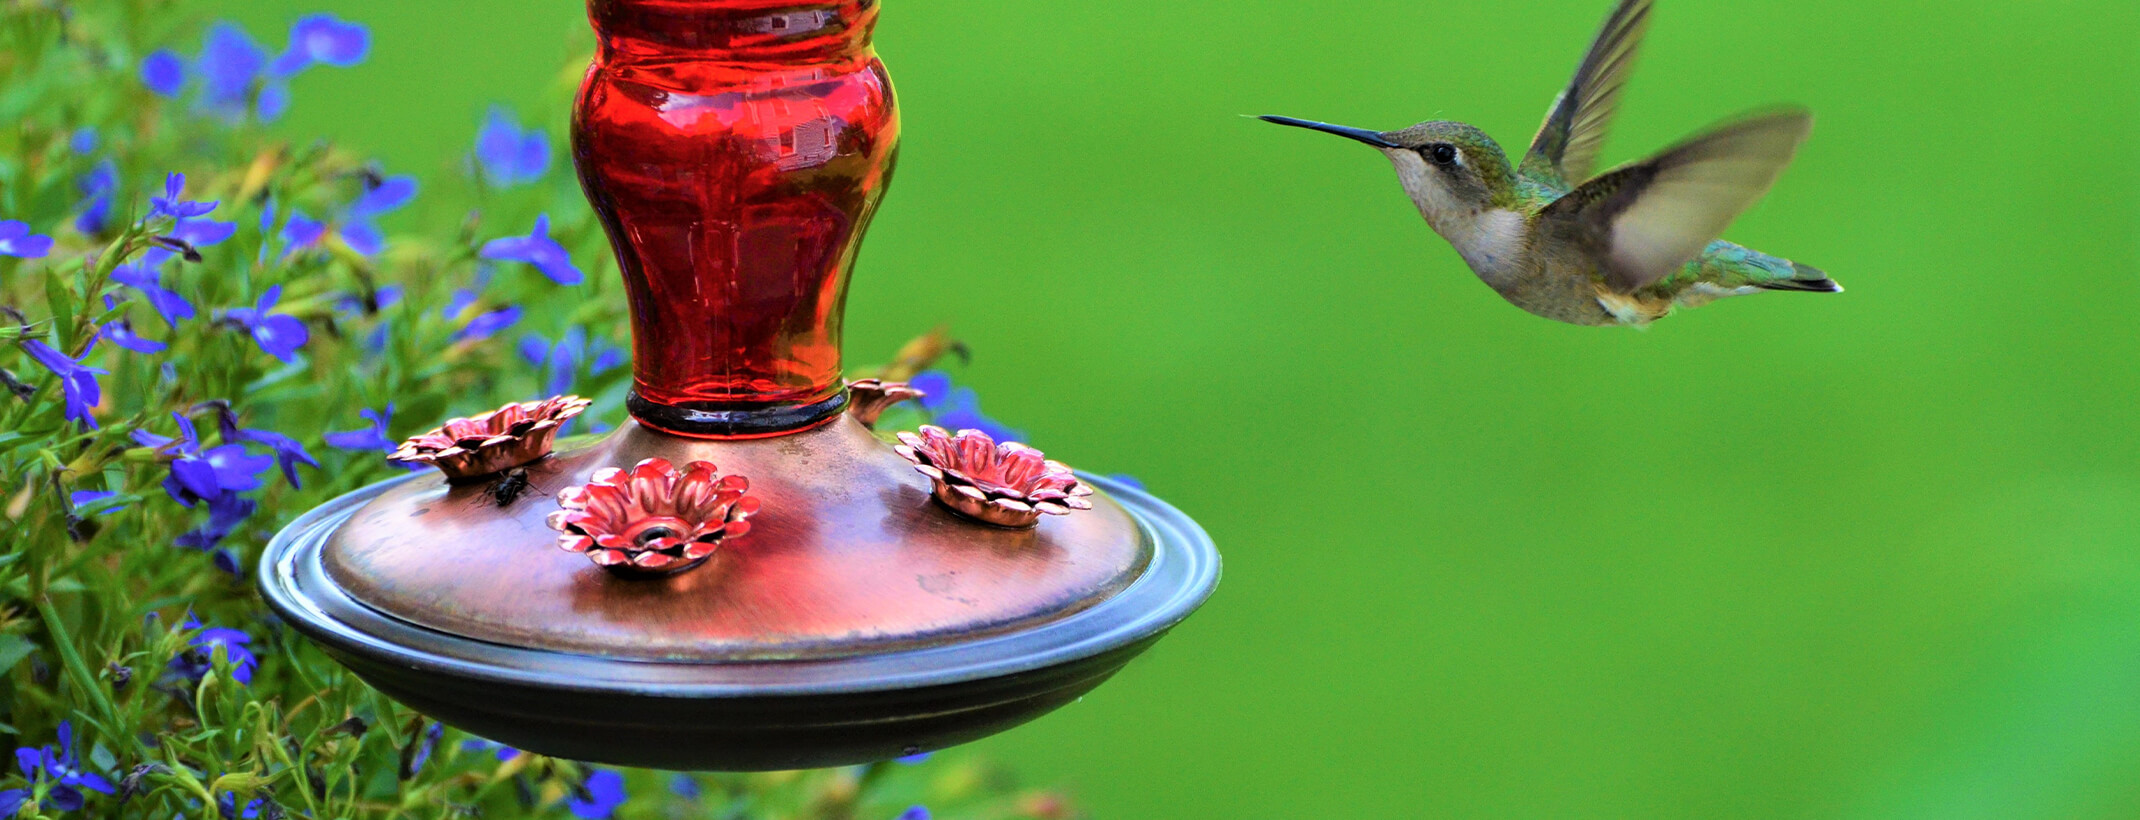 A closeup of a hummingbird flying toward a red hummingbird feeder with purple flowers nearby and a blurred bright green background